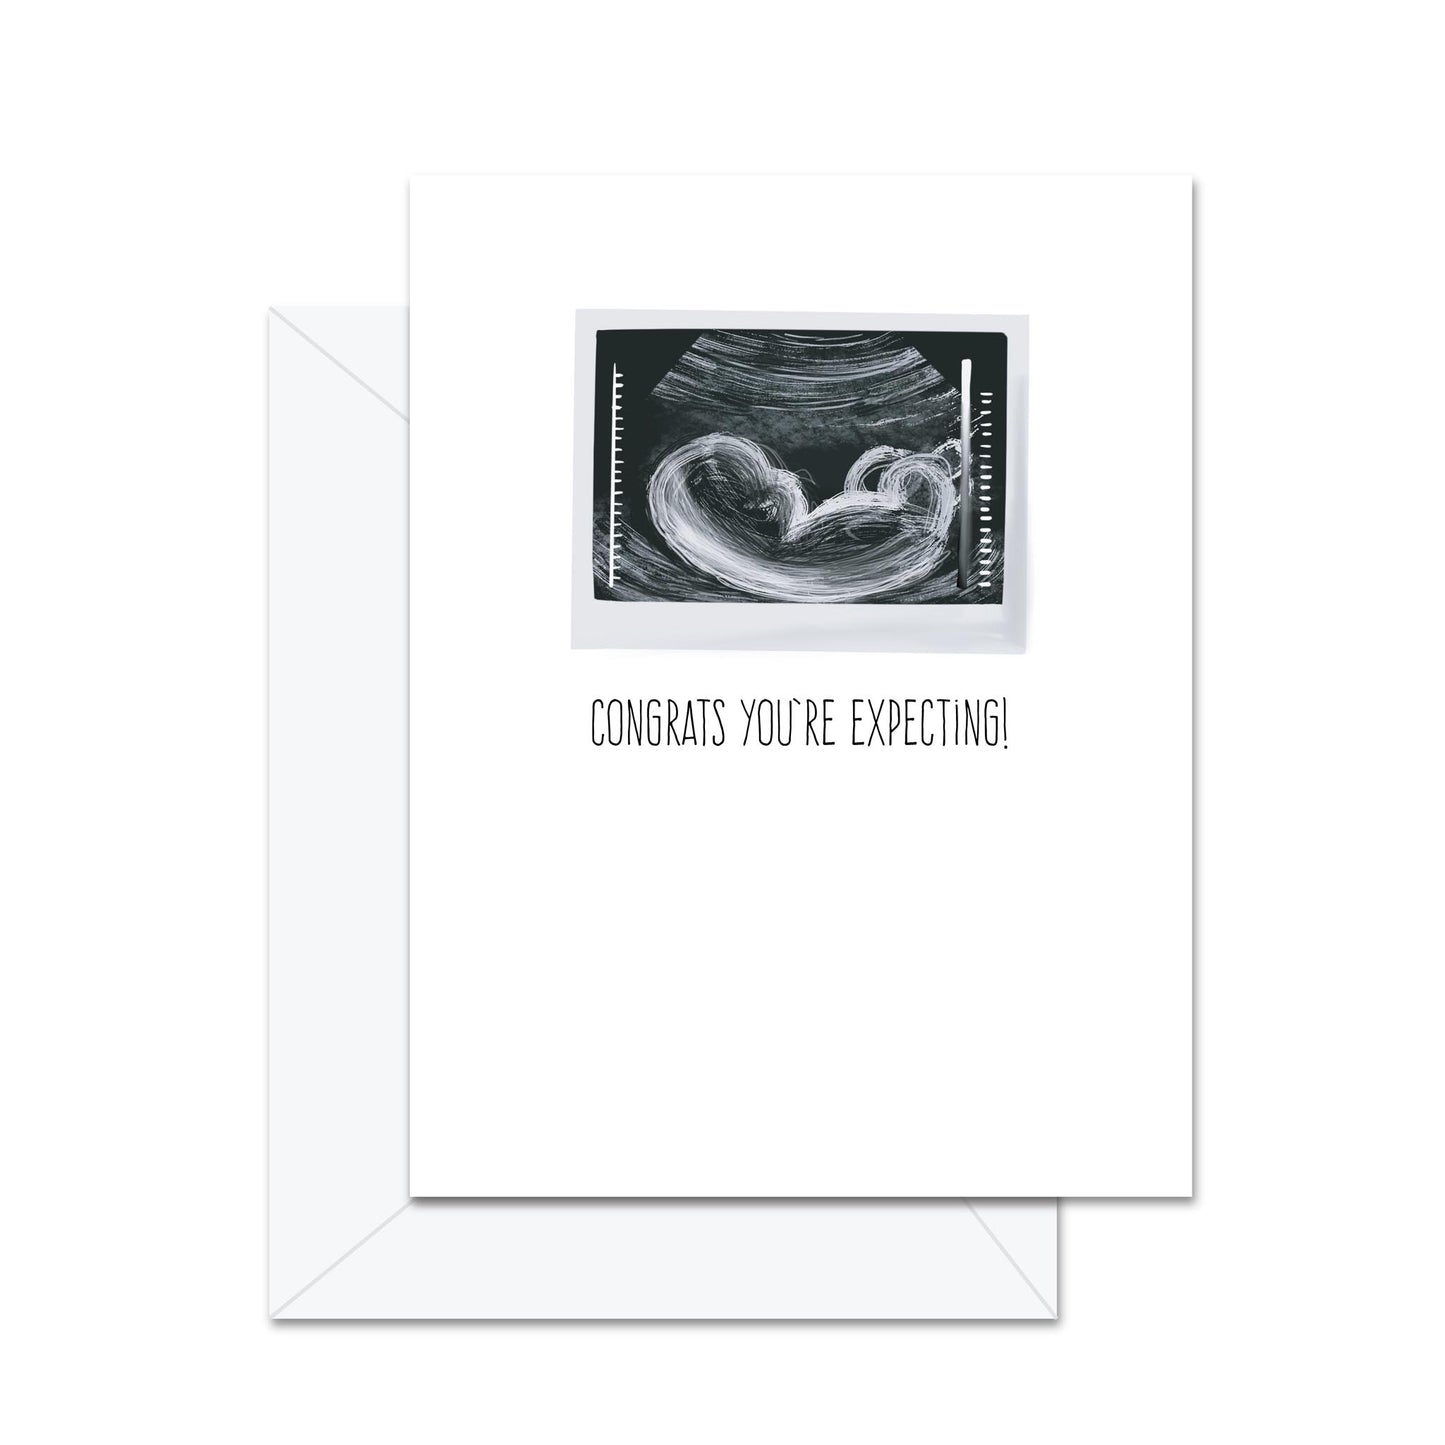 Congrats You're Expecting! -Greeting Card